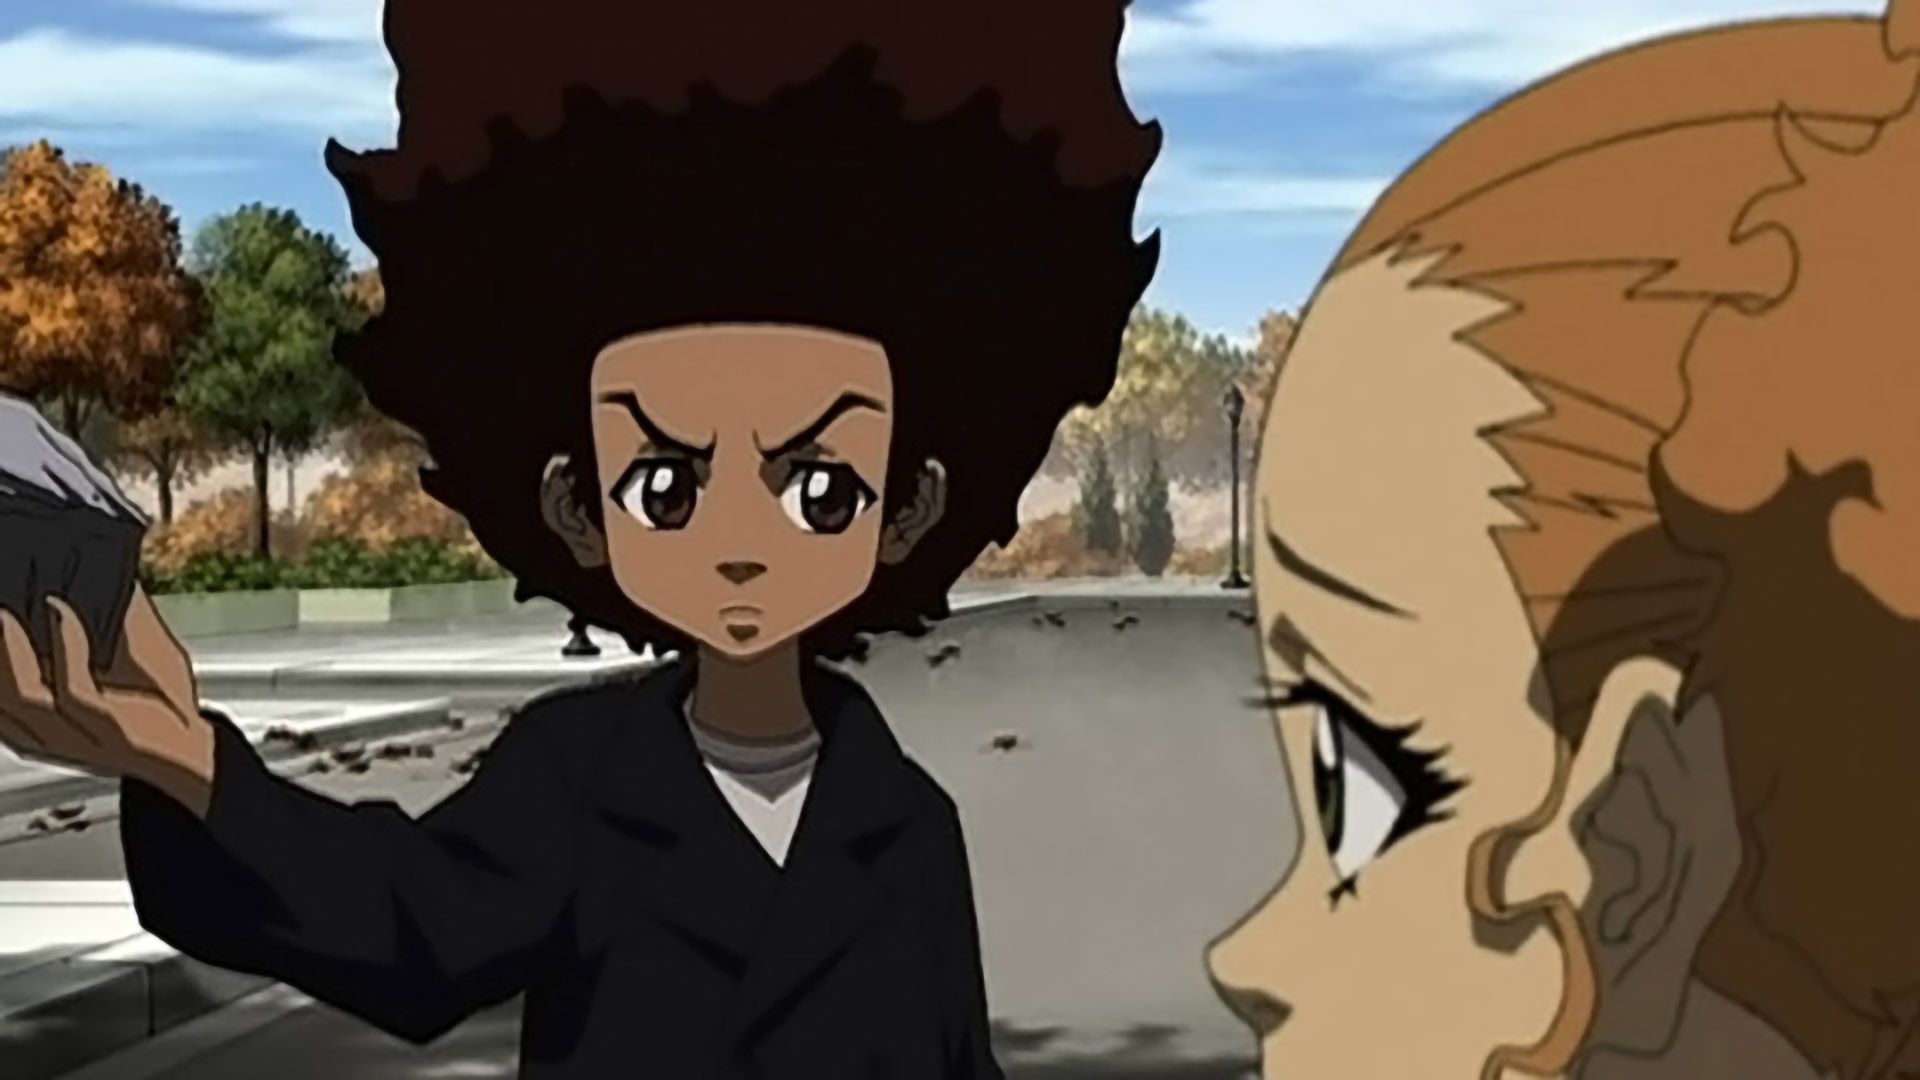 1920x1080 - The Red Ball Boondocks : The Boondocks 3 03 The Red Ball Review...